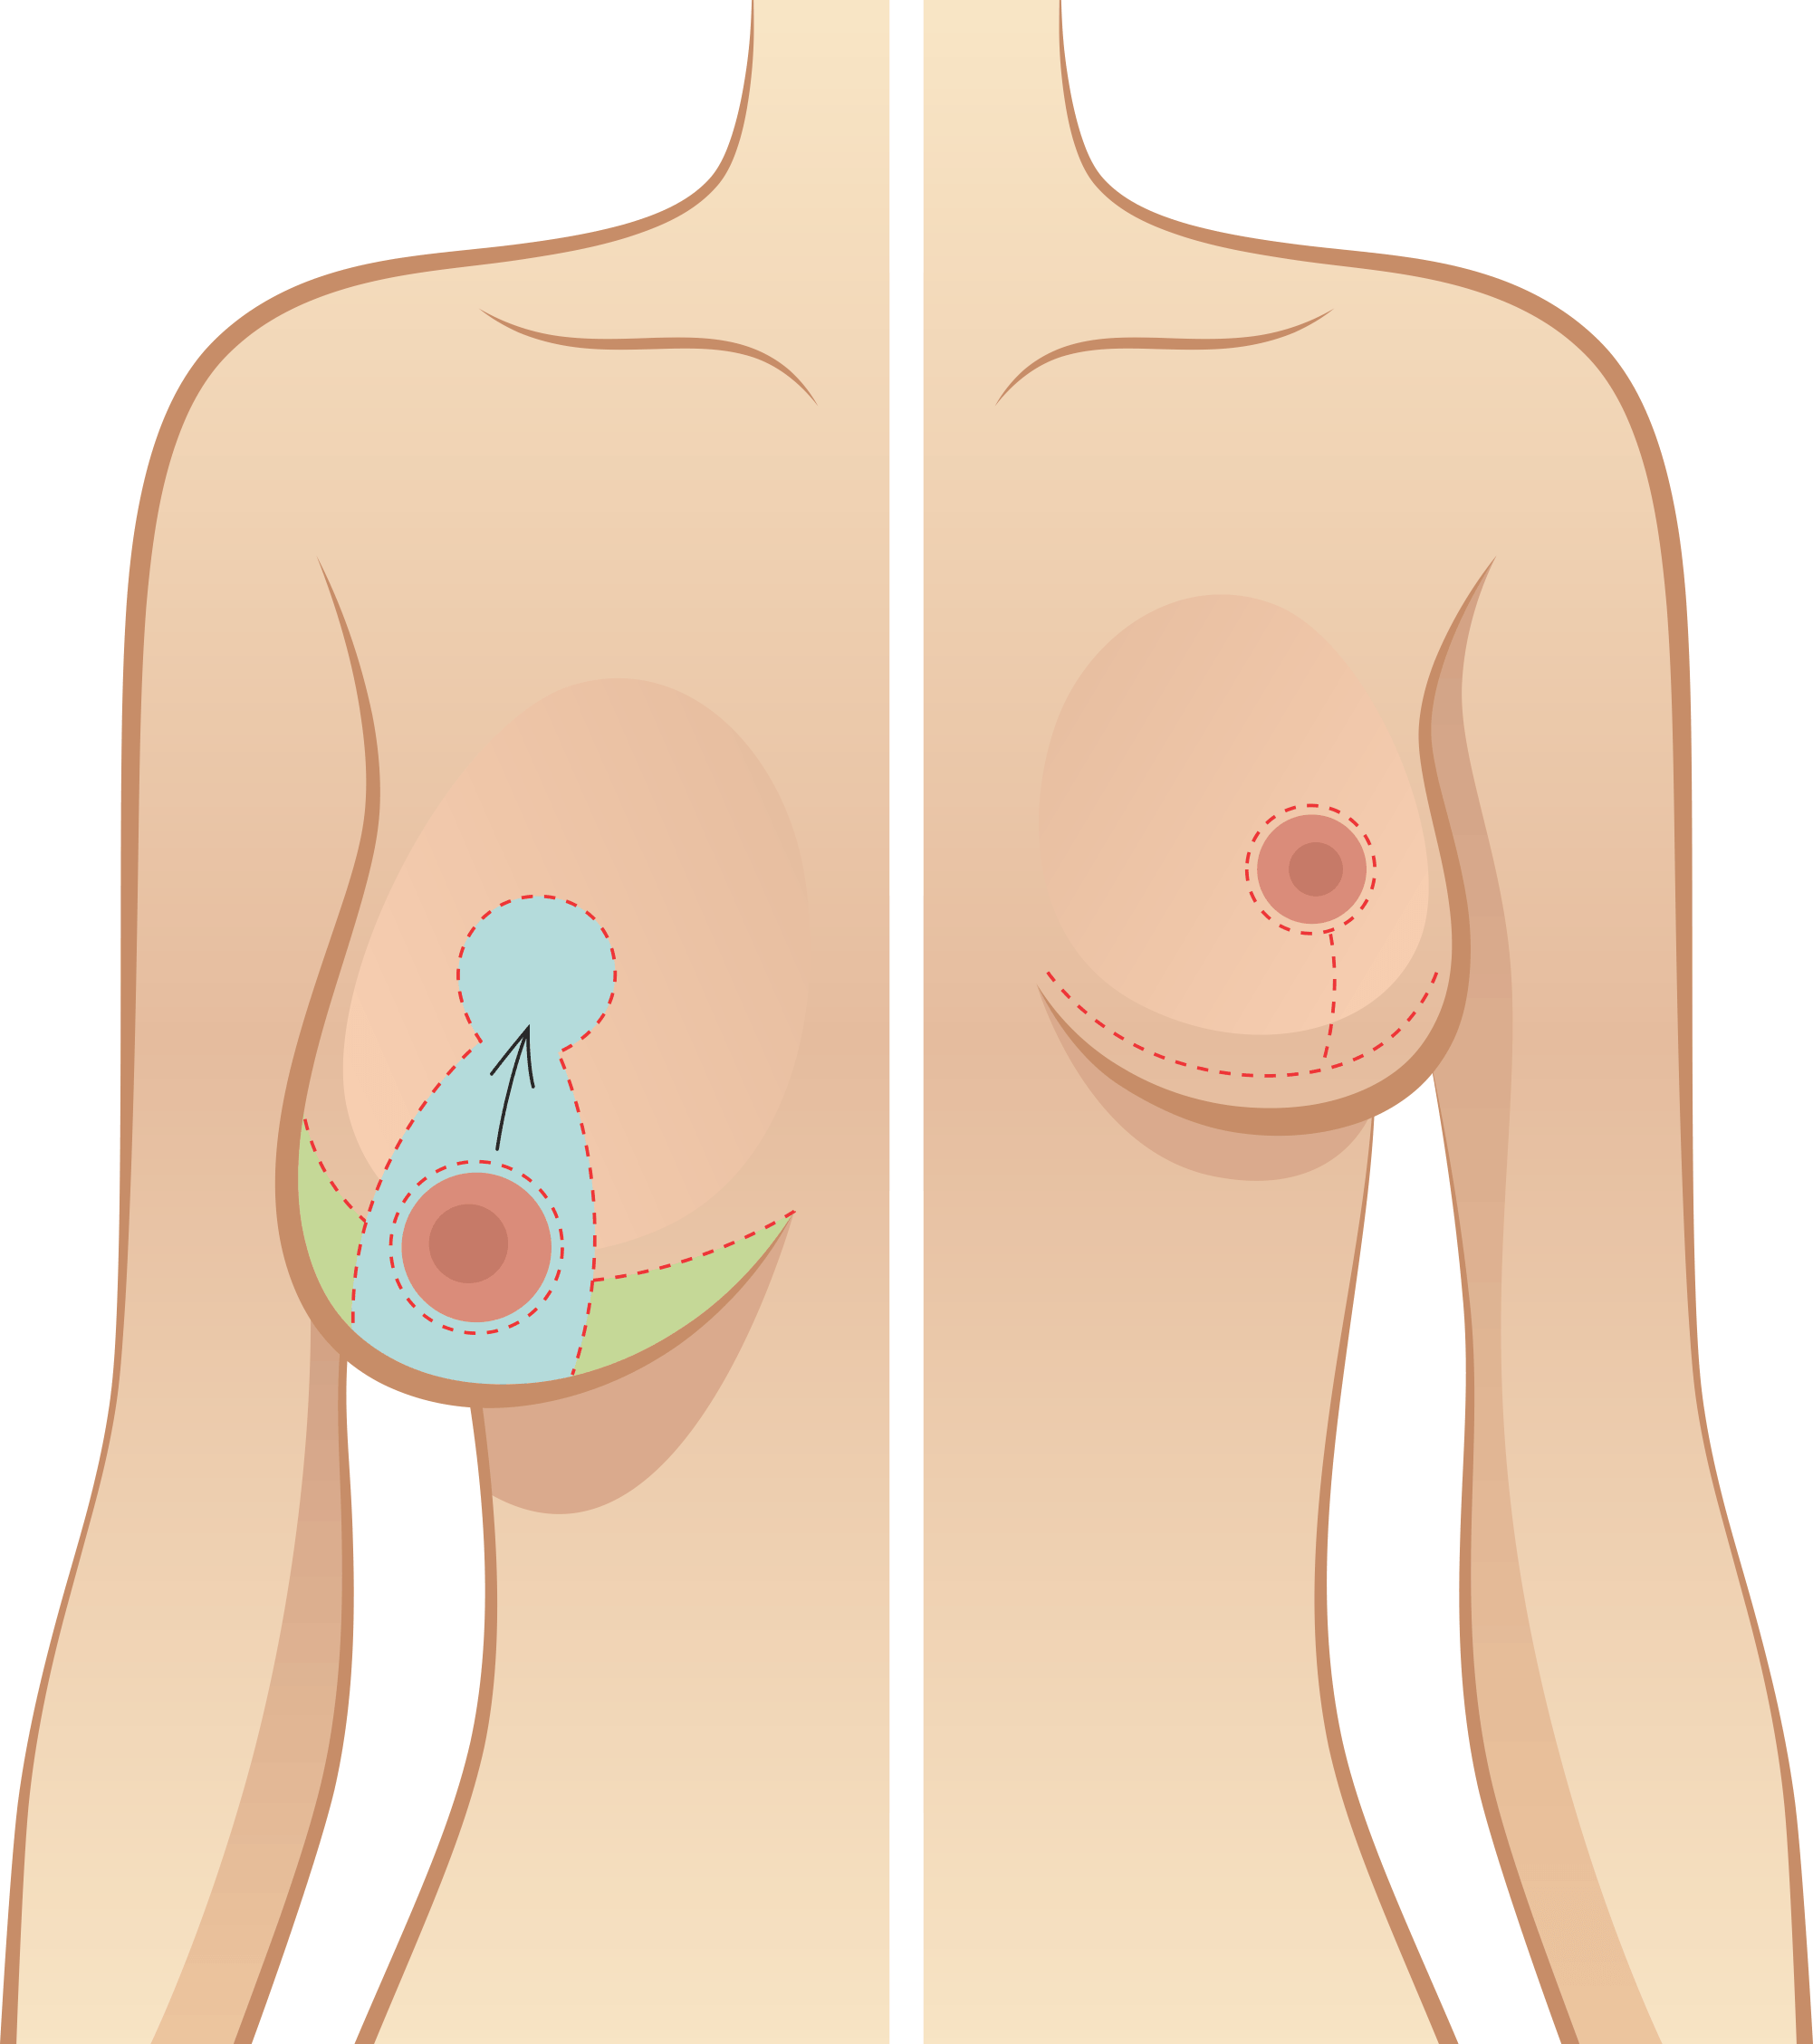 Surgical incisions for reduction mammoplasty. (a) An incision is